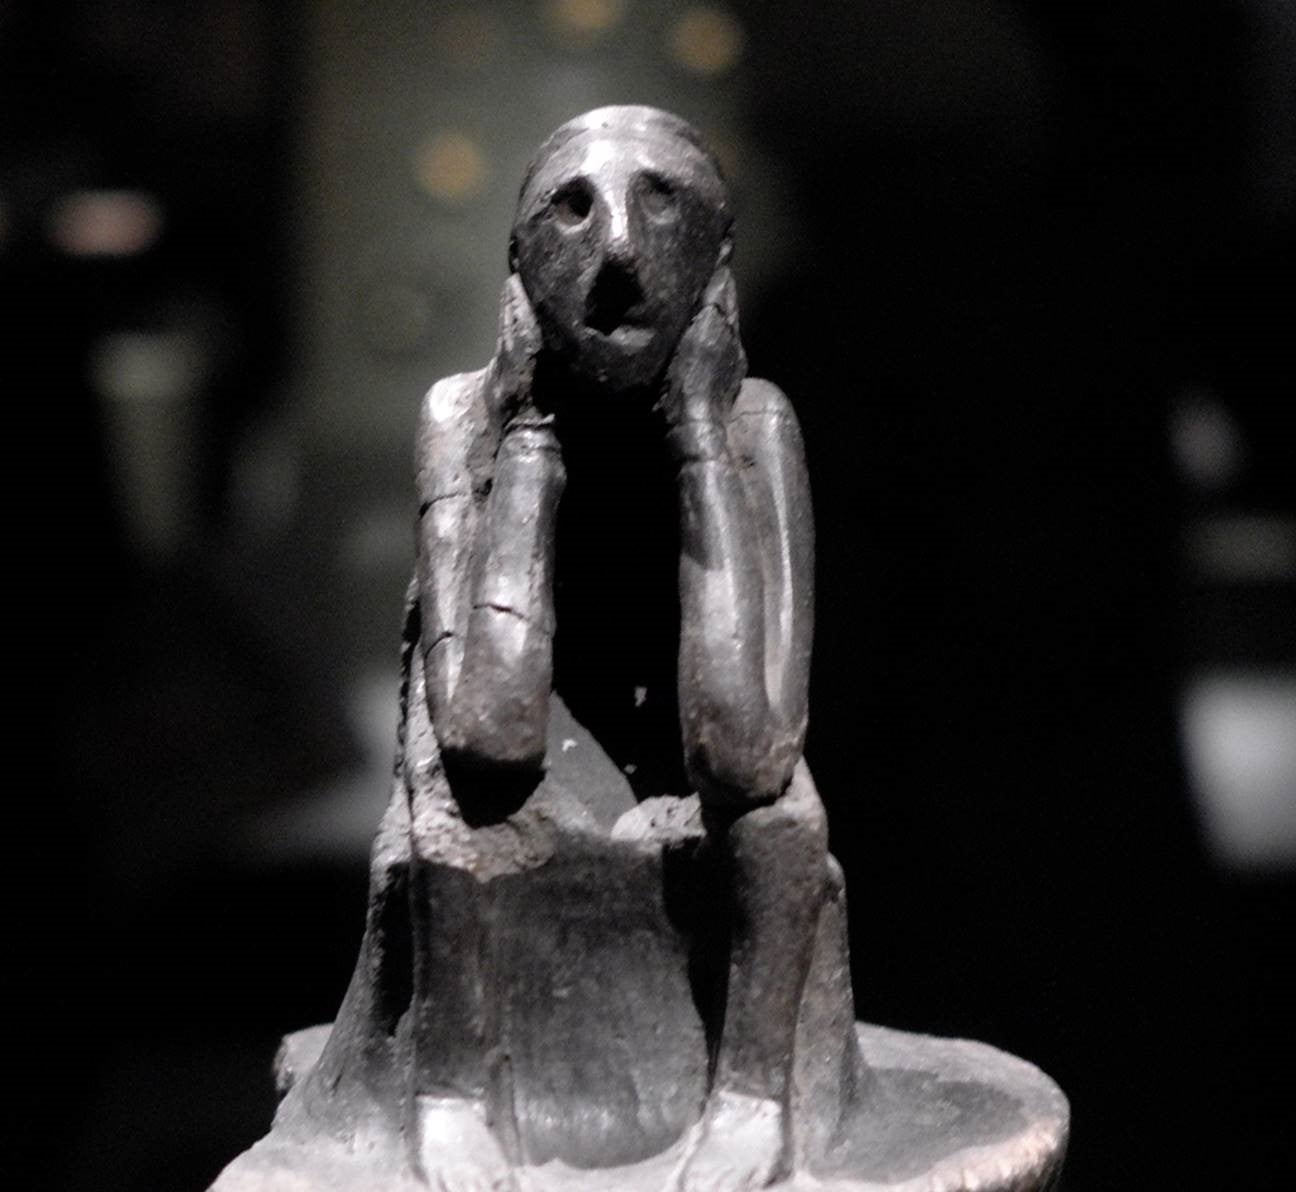 Spong Man, which is the earliest Anglo-Saxon sculpture of a person, from the 5th century